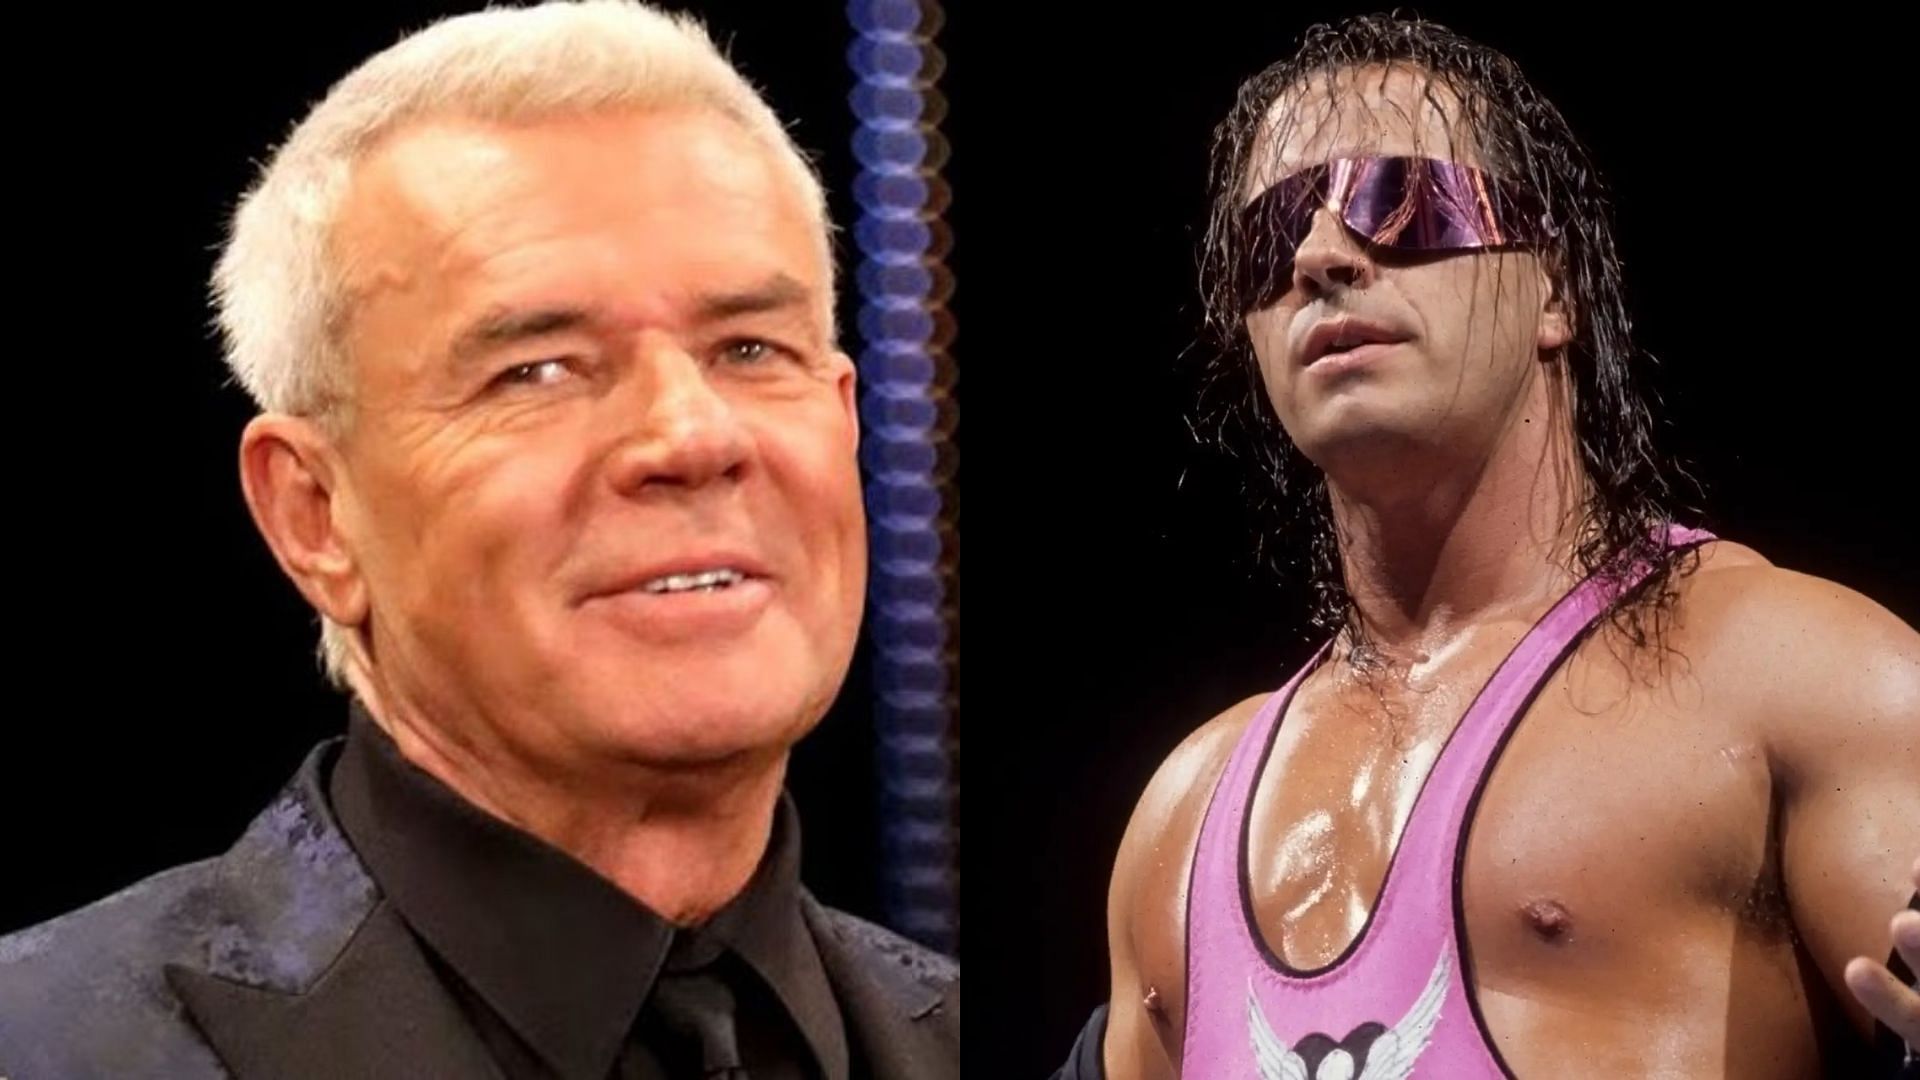 Eric Bischoff signed Bret Hart after the Montreal Screwjob